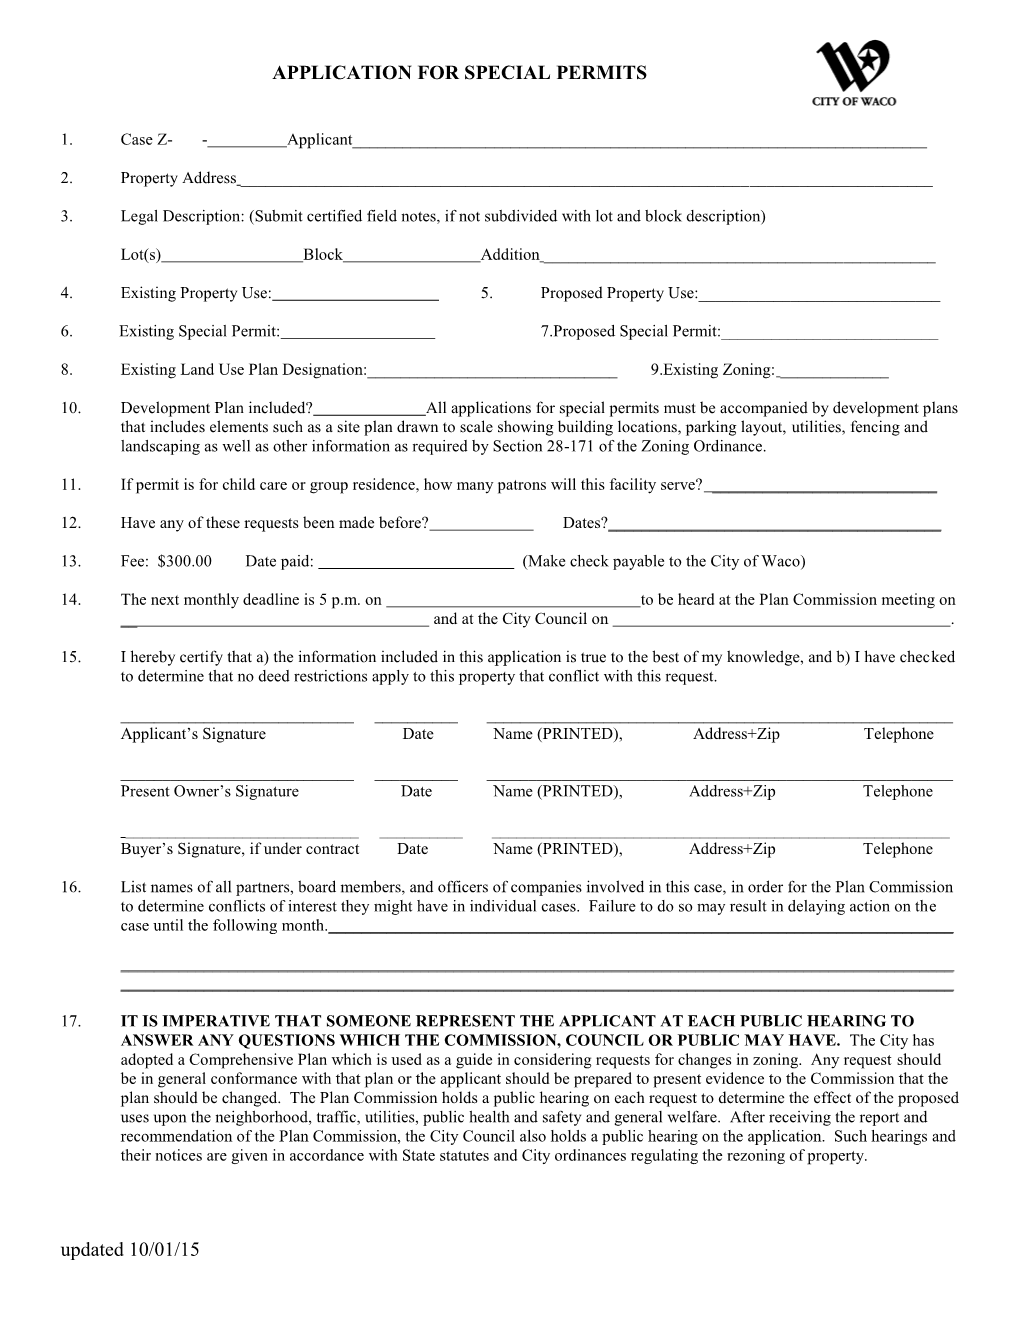 Updated 10/01/15 APPLICATION for SPECIAL PERMITS